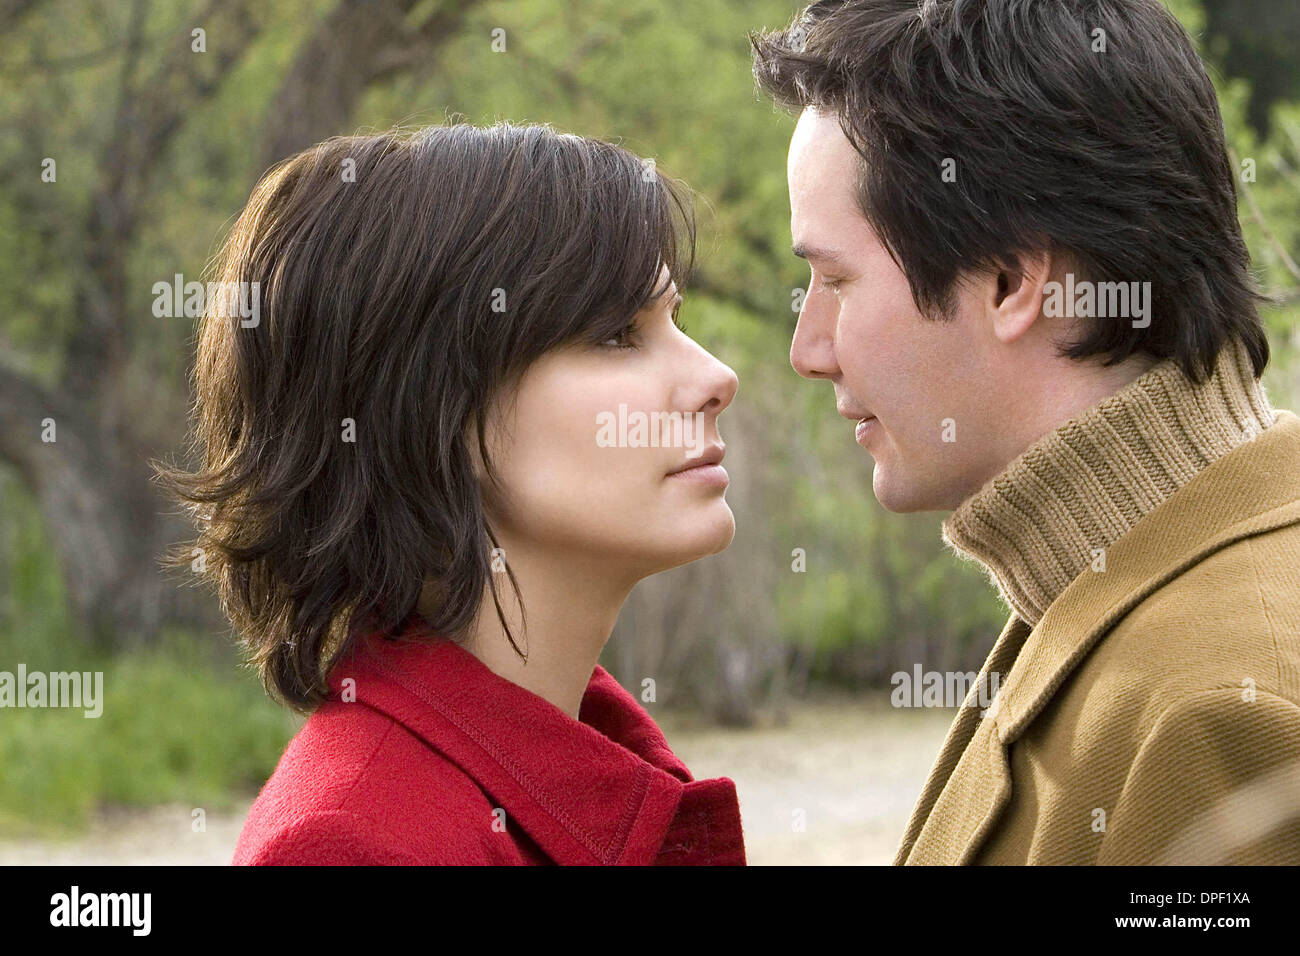 Aug. 03, 2006 - SANDRA BULLOCK stars as Kate Forster and KEANU REEVES stars as Alex Wyler in Bros. Pictures' and Village Roadshow Pictures' romantic drama ''The Lake House.''. STILL.